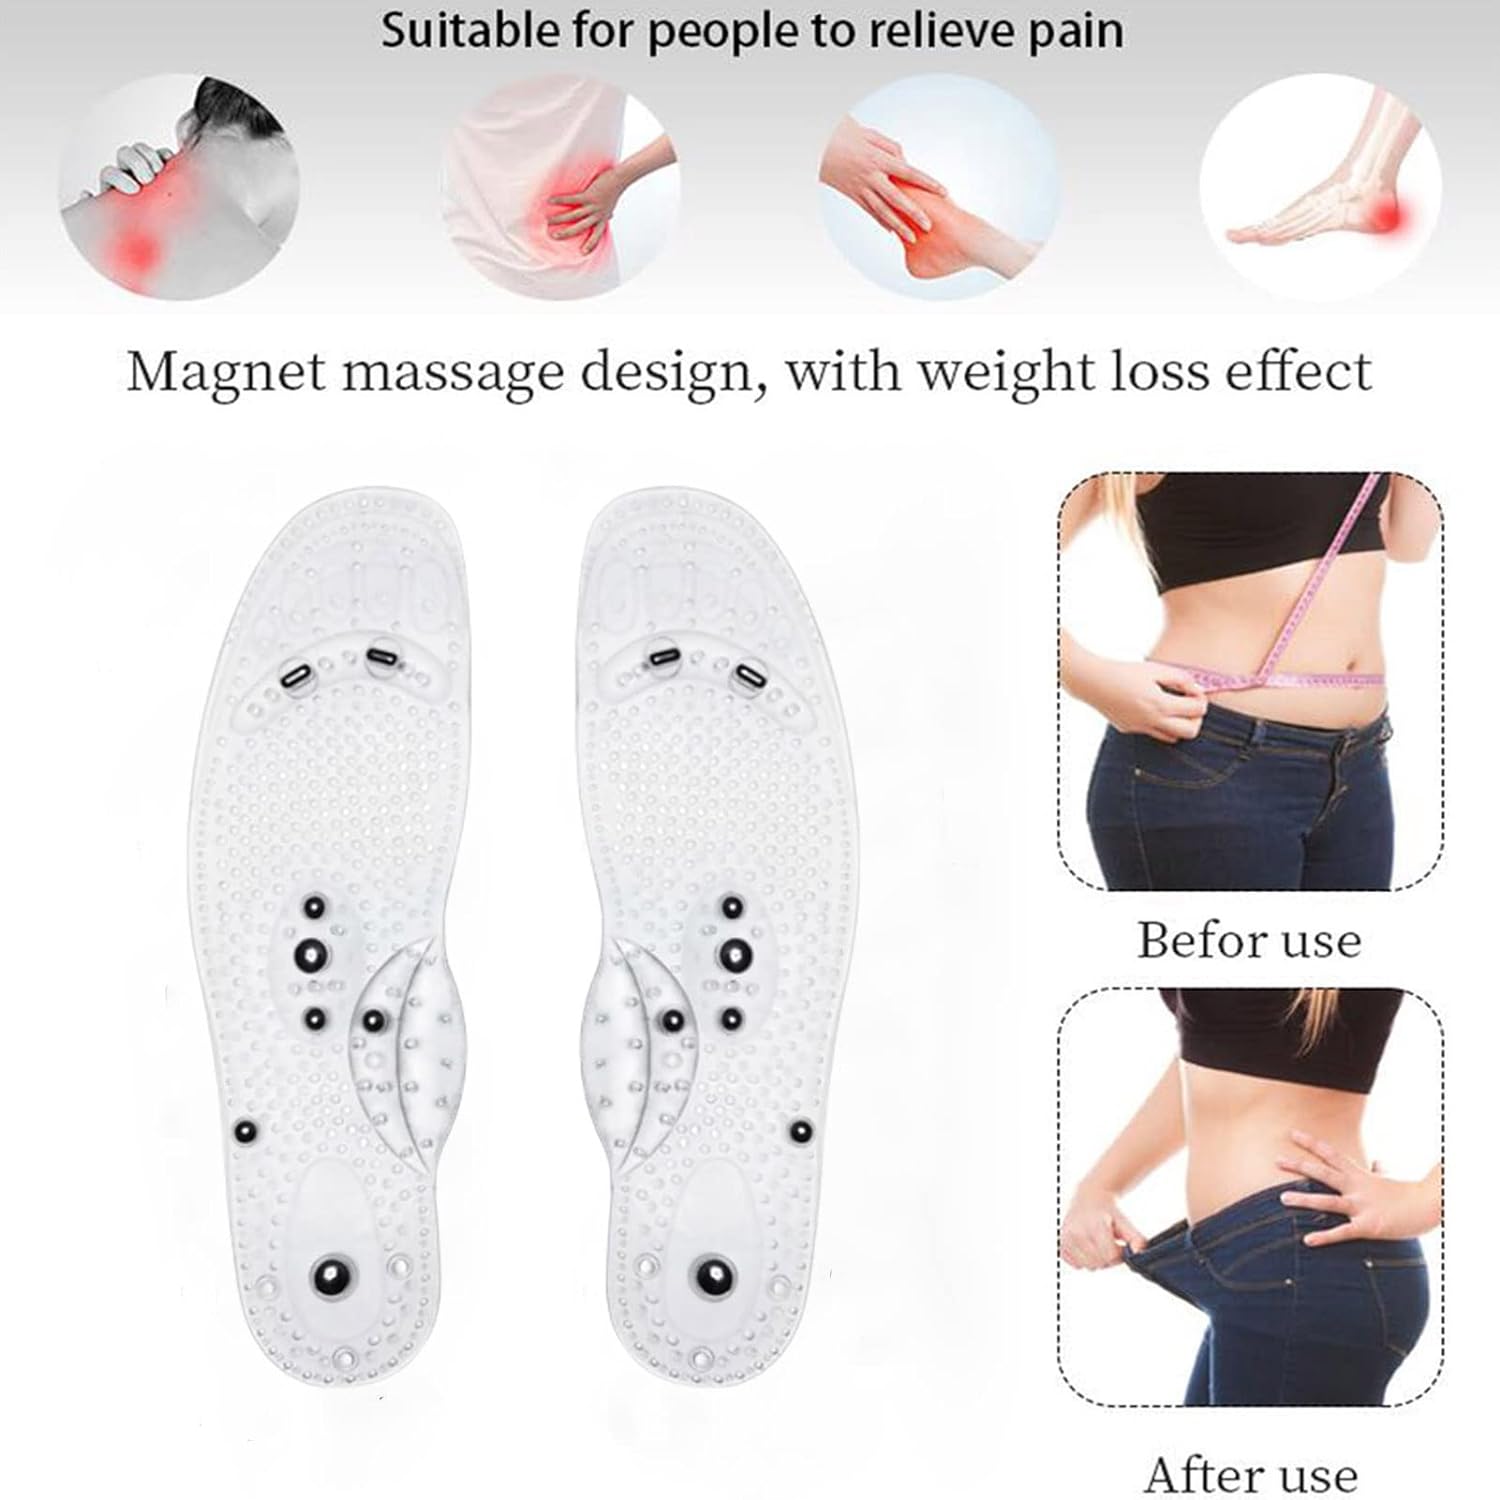 YtrKiasy Magnetic Acupressure Insoles Foot Massage Shoe-Pad Foot Reflexology Pain Relief Shoe Inserts Foot Insoles with 8 Magnets